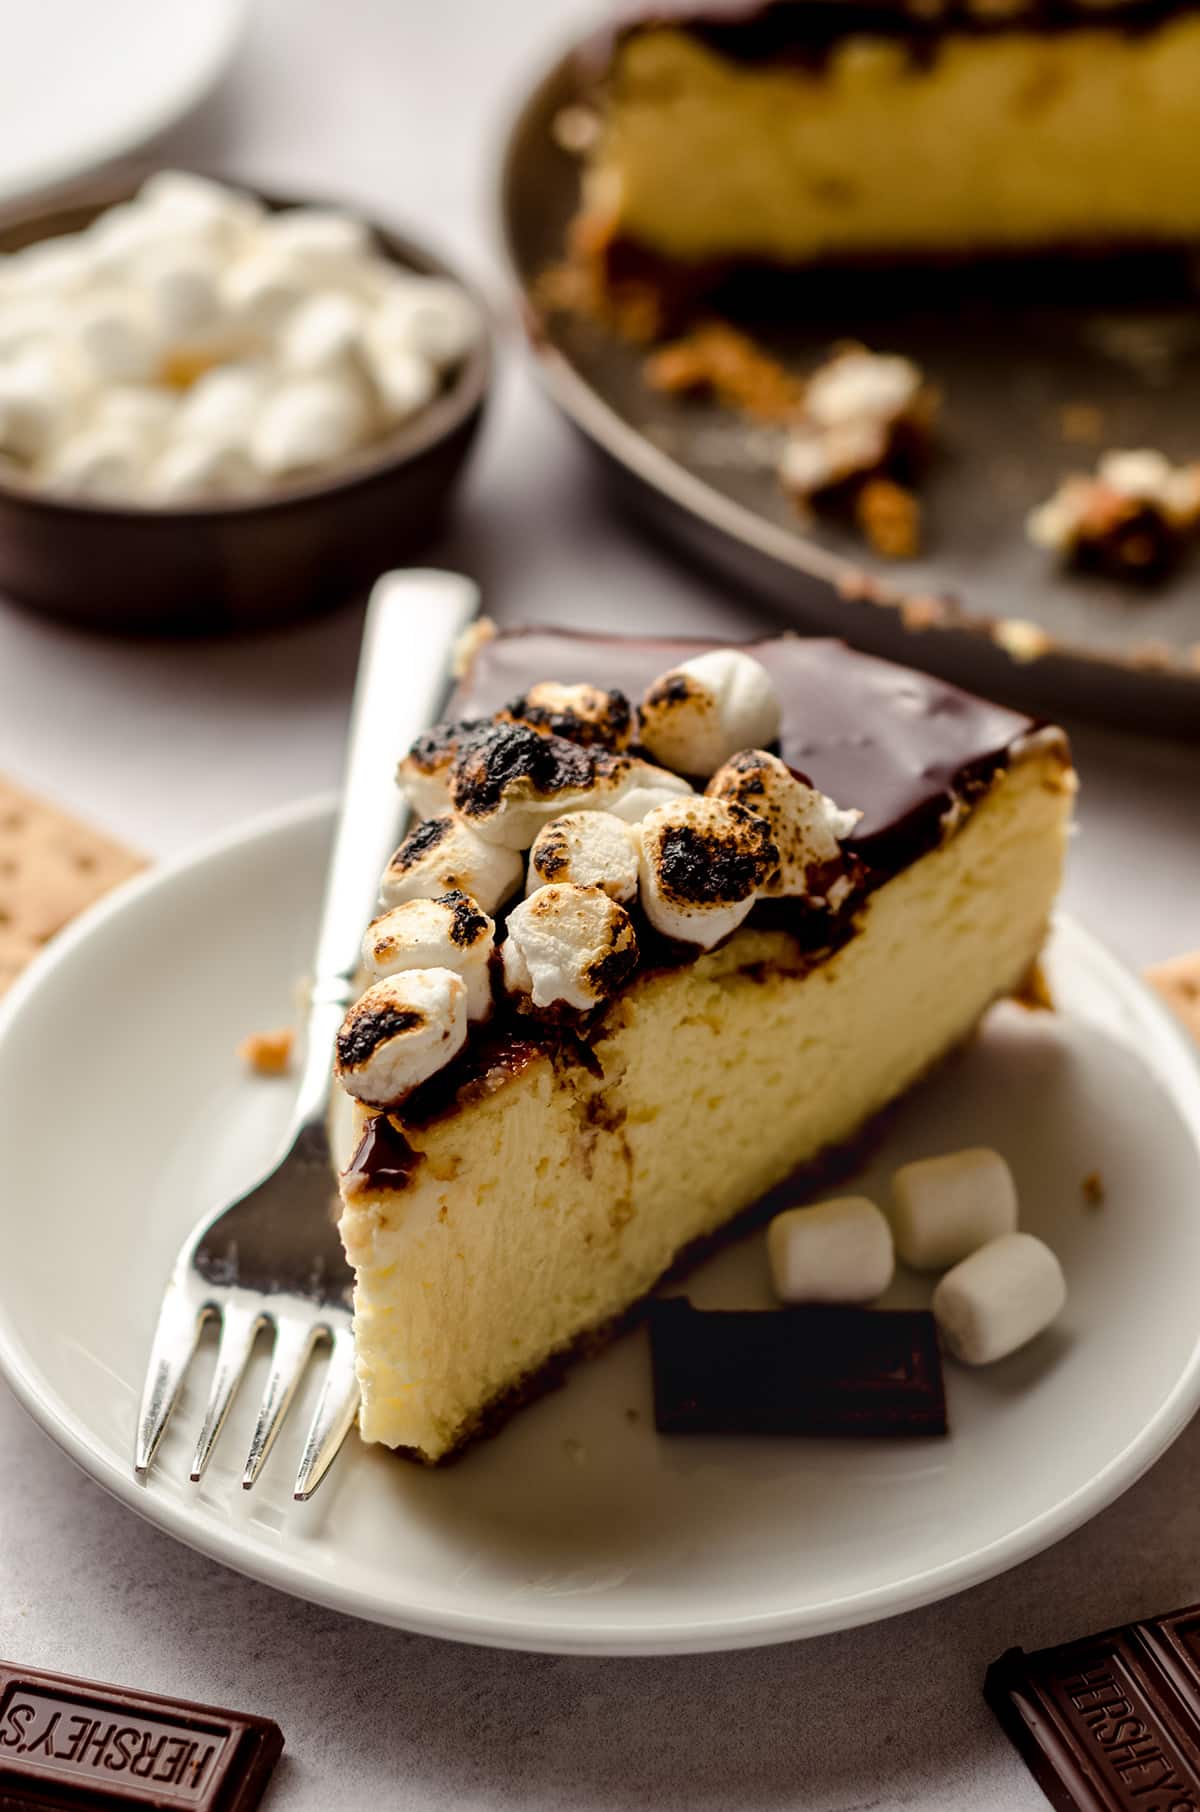 A slice of smores cheesecake, topped with toasted marshmallows.